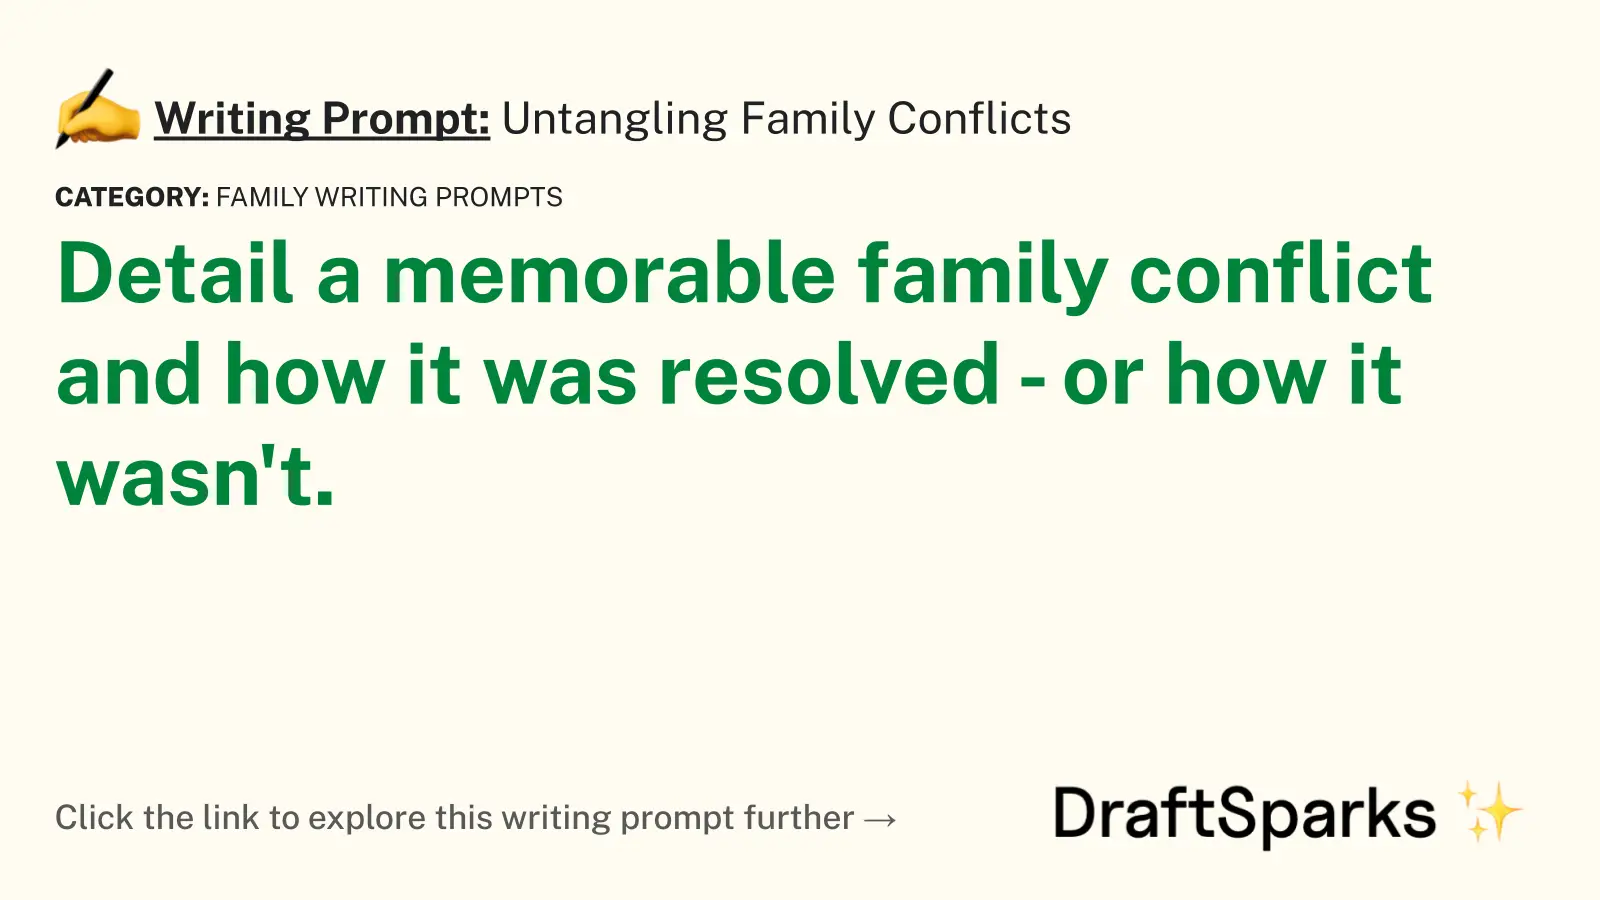 Untangling Family Conflicts